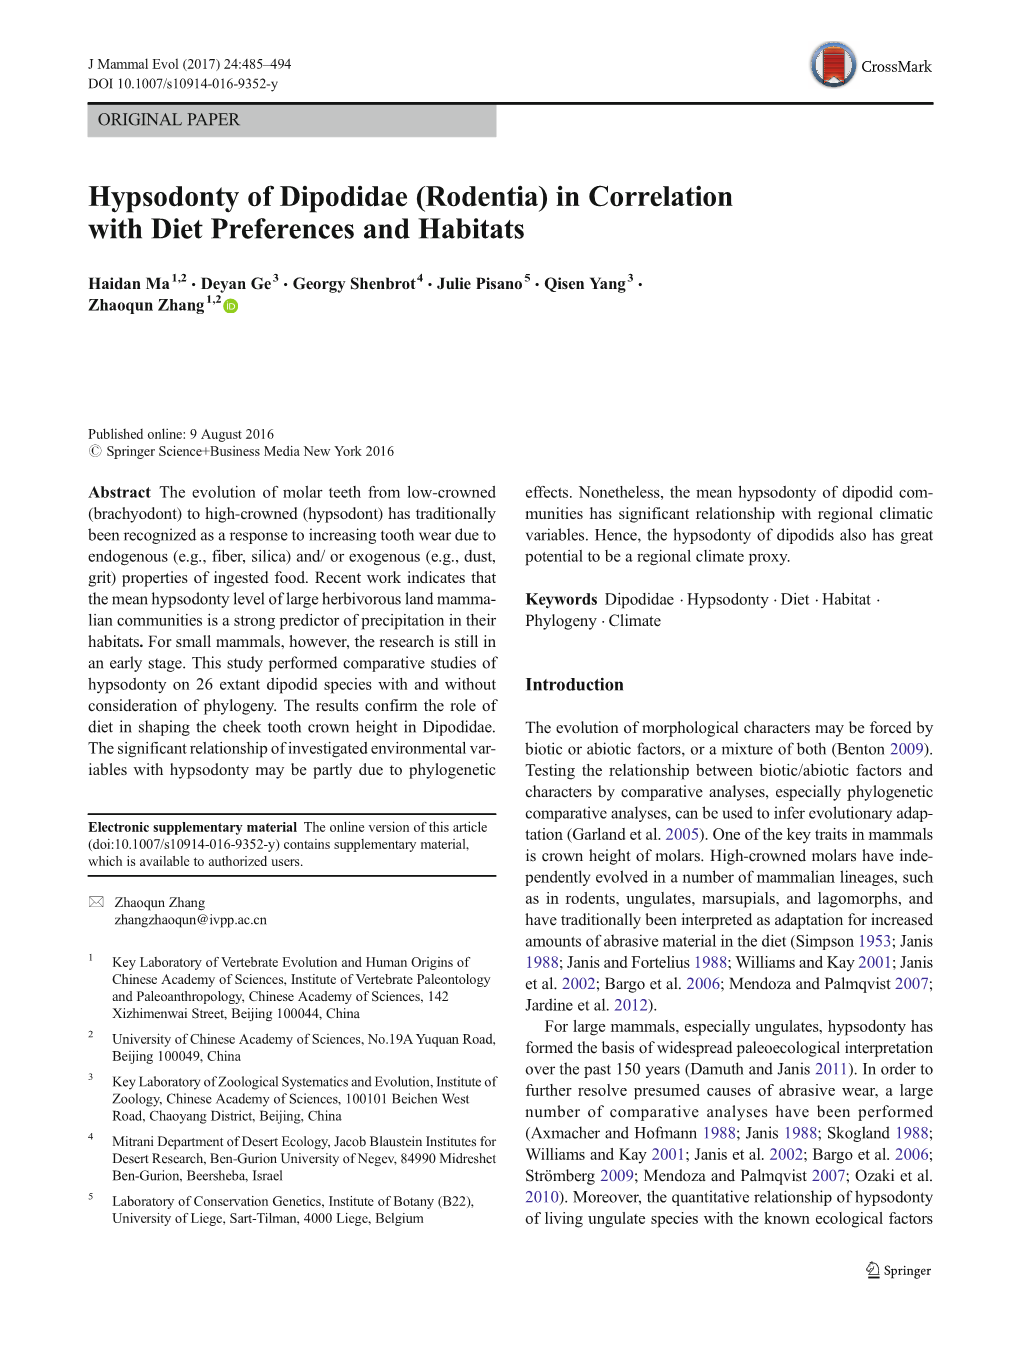 Hypsodonty of Dipodidae (Rodentia) in Correlation with Diet Preferences and Habitats